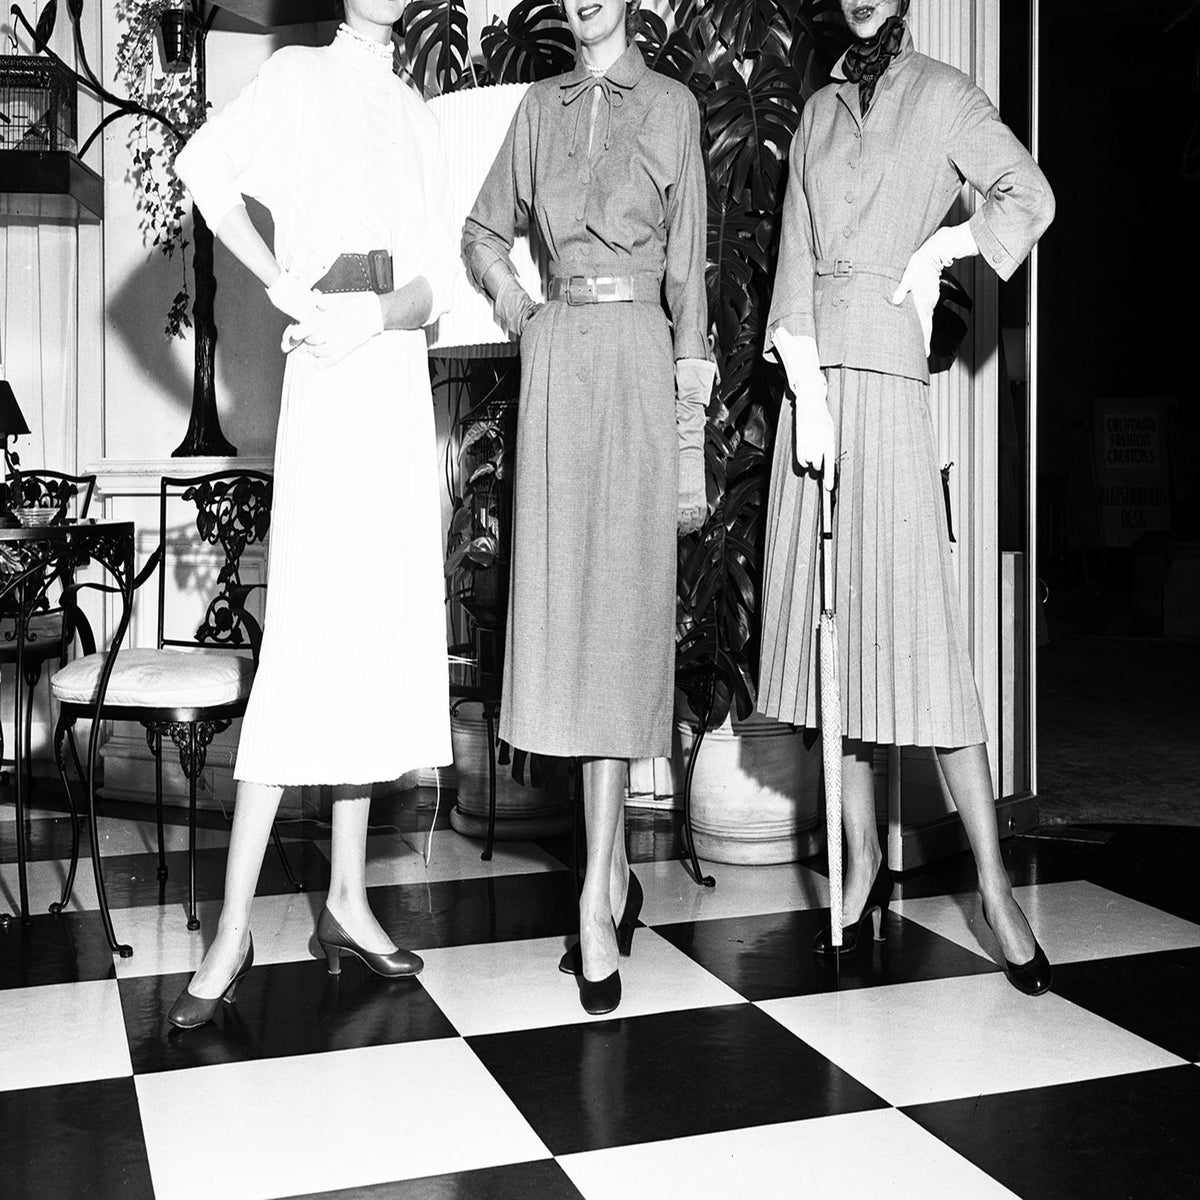 In Dressing Room: Archiving Fashion, View Mid-Century Women's